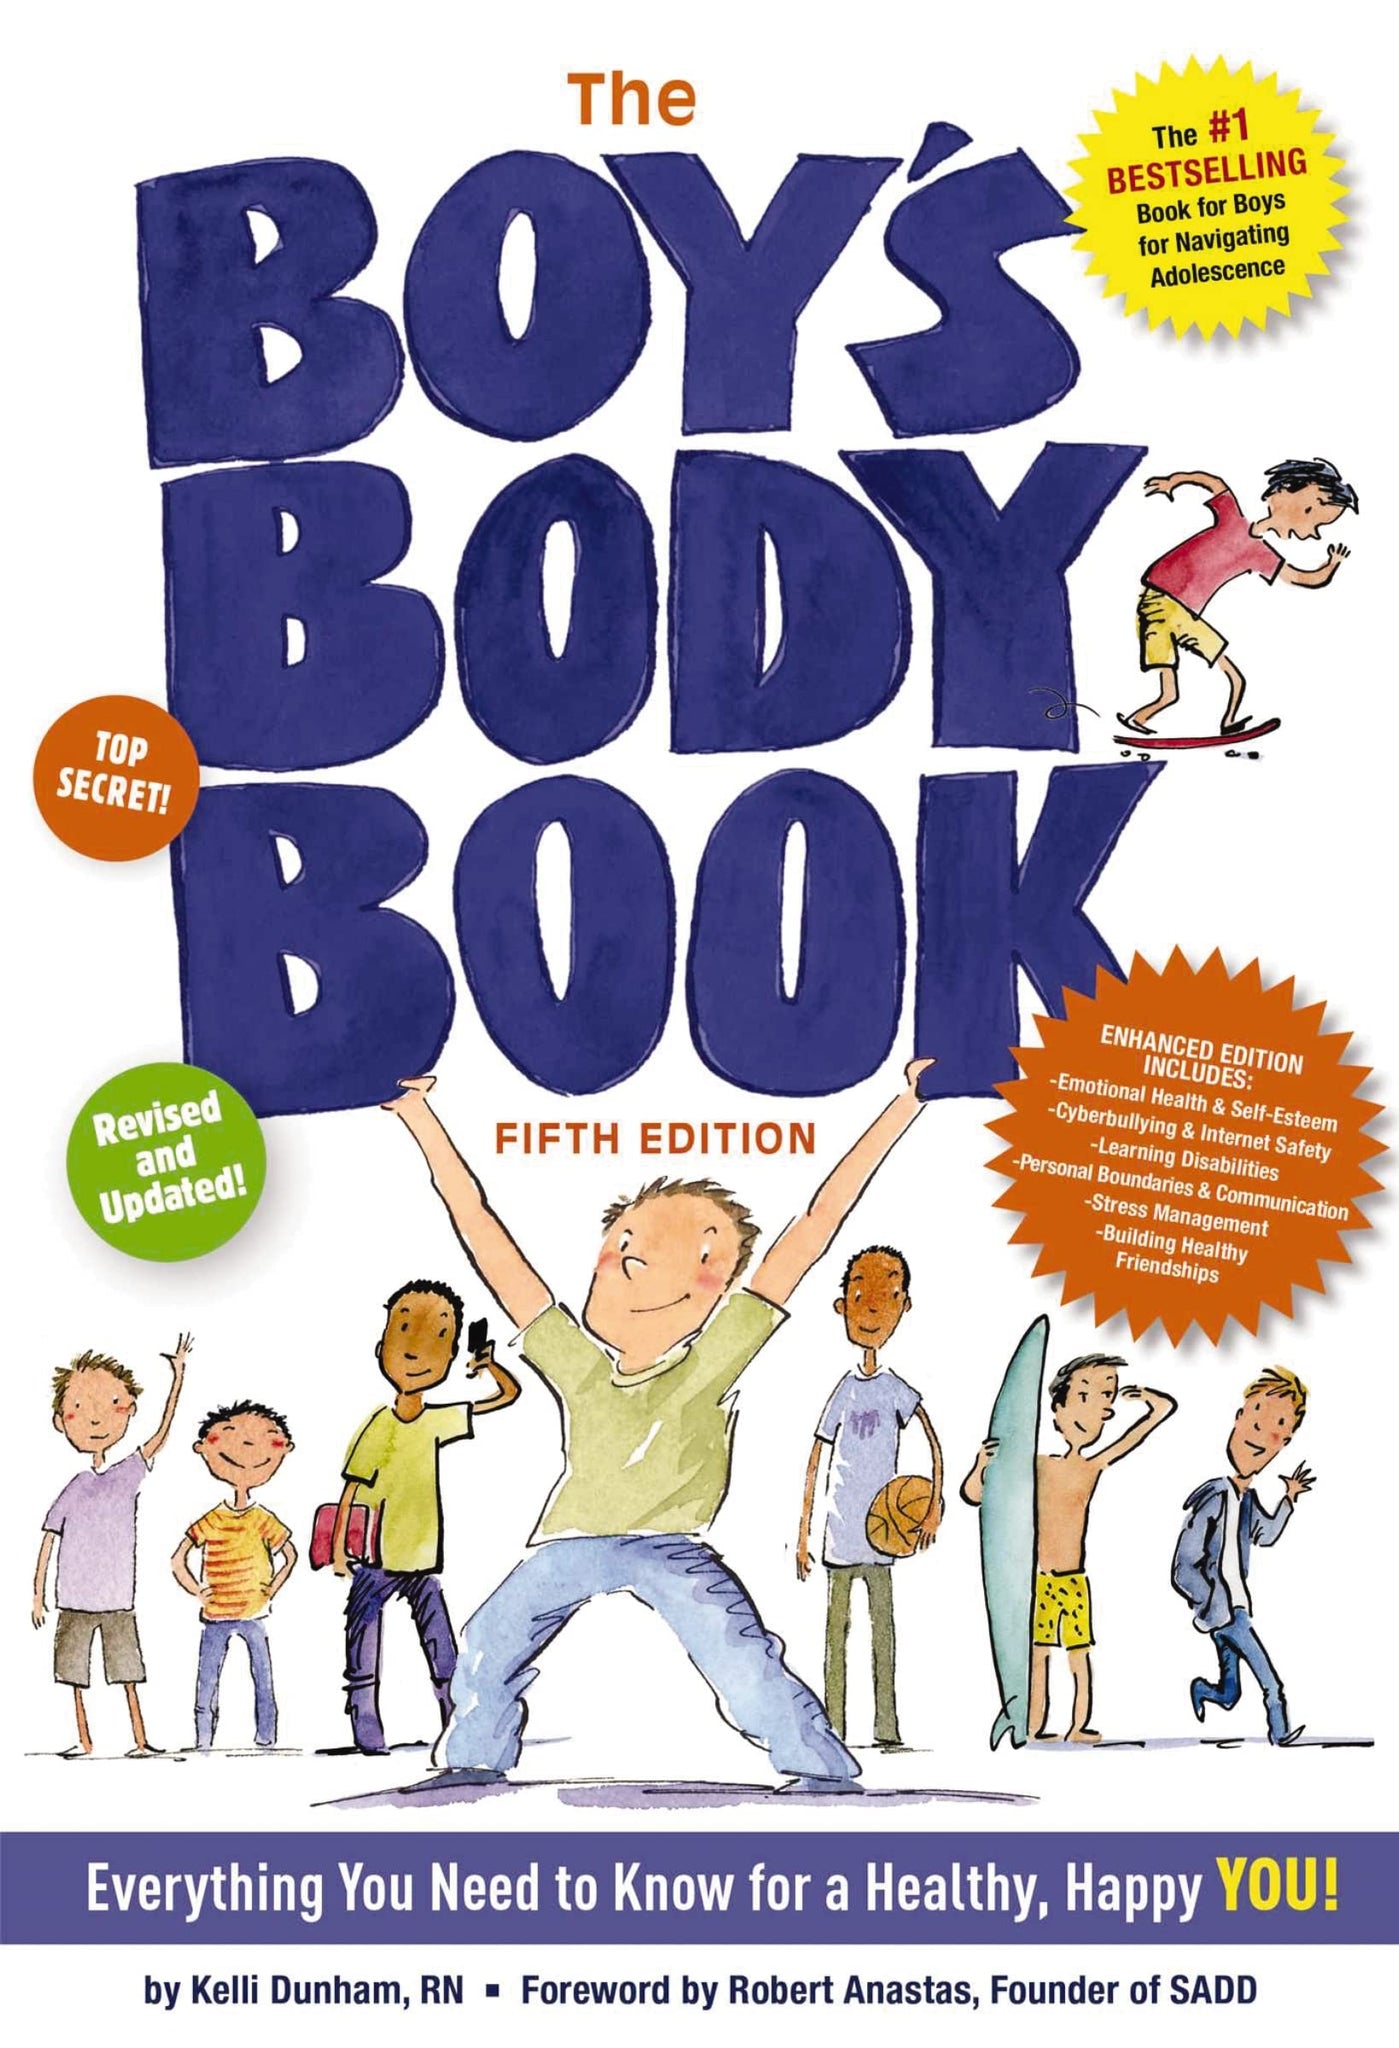 The Boy's Body Book: Everything You Need to Know for Growing Up!